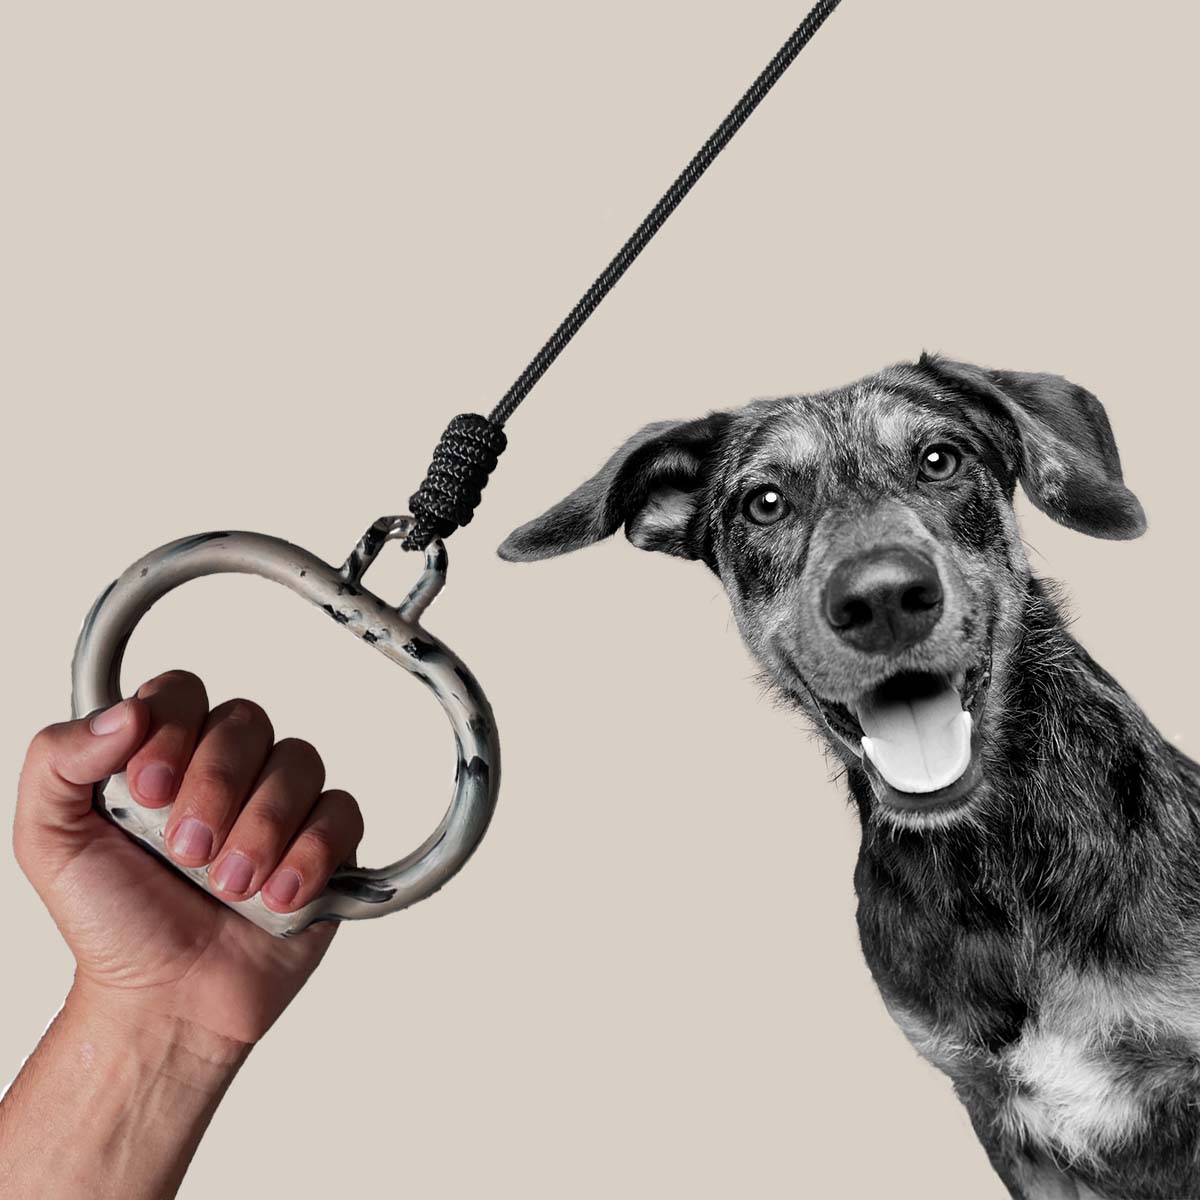 Hand holding recycled dog leash with smiling dog nearby